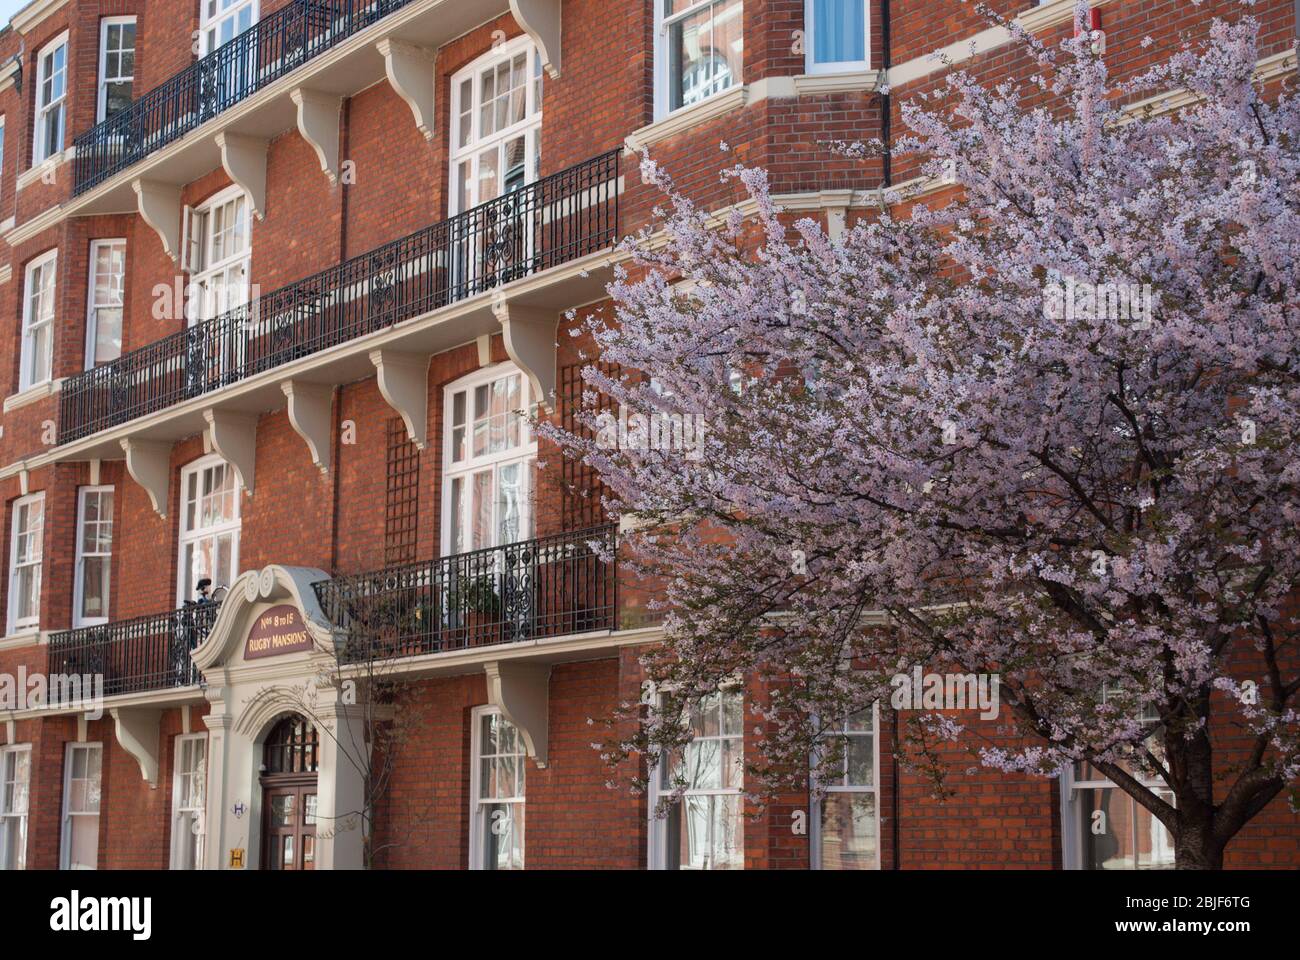 Red Brick Victorian Architecture Mansion Block Glyn Mansions, Hammersmith Road, Hammersmith, London W14 8XH Stock Photo